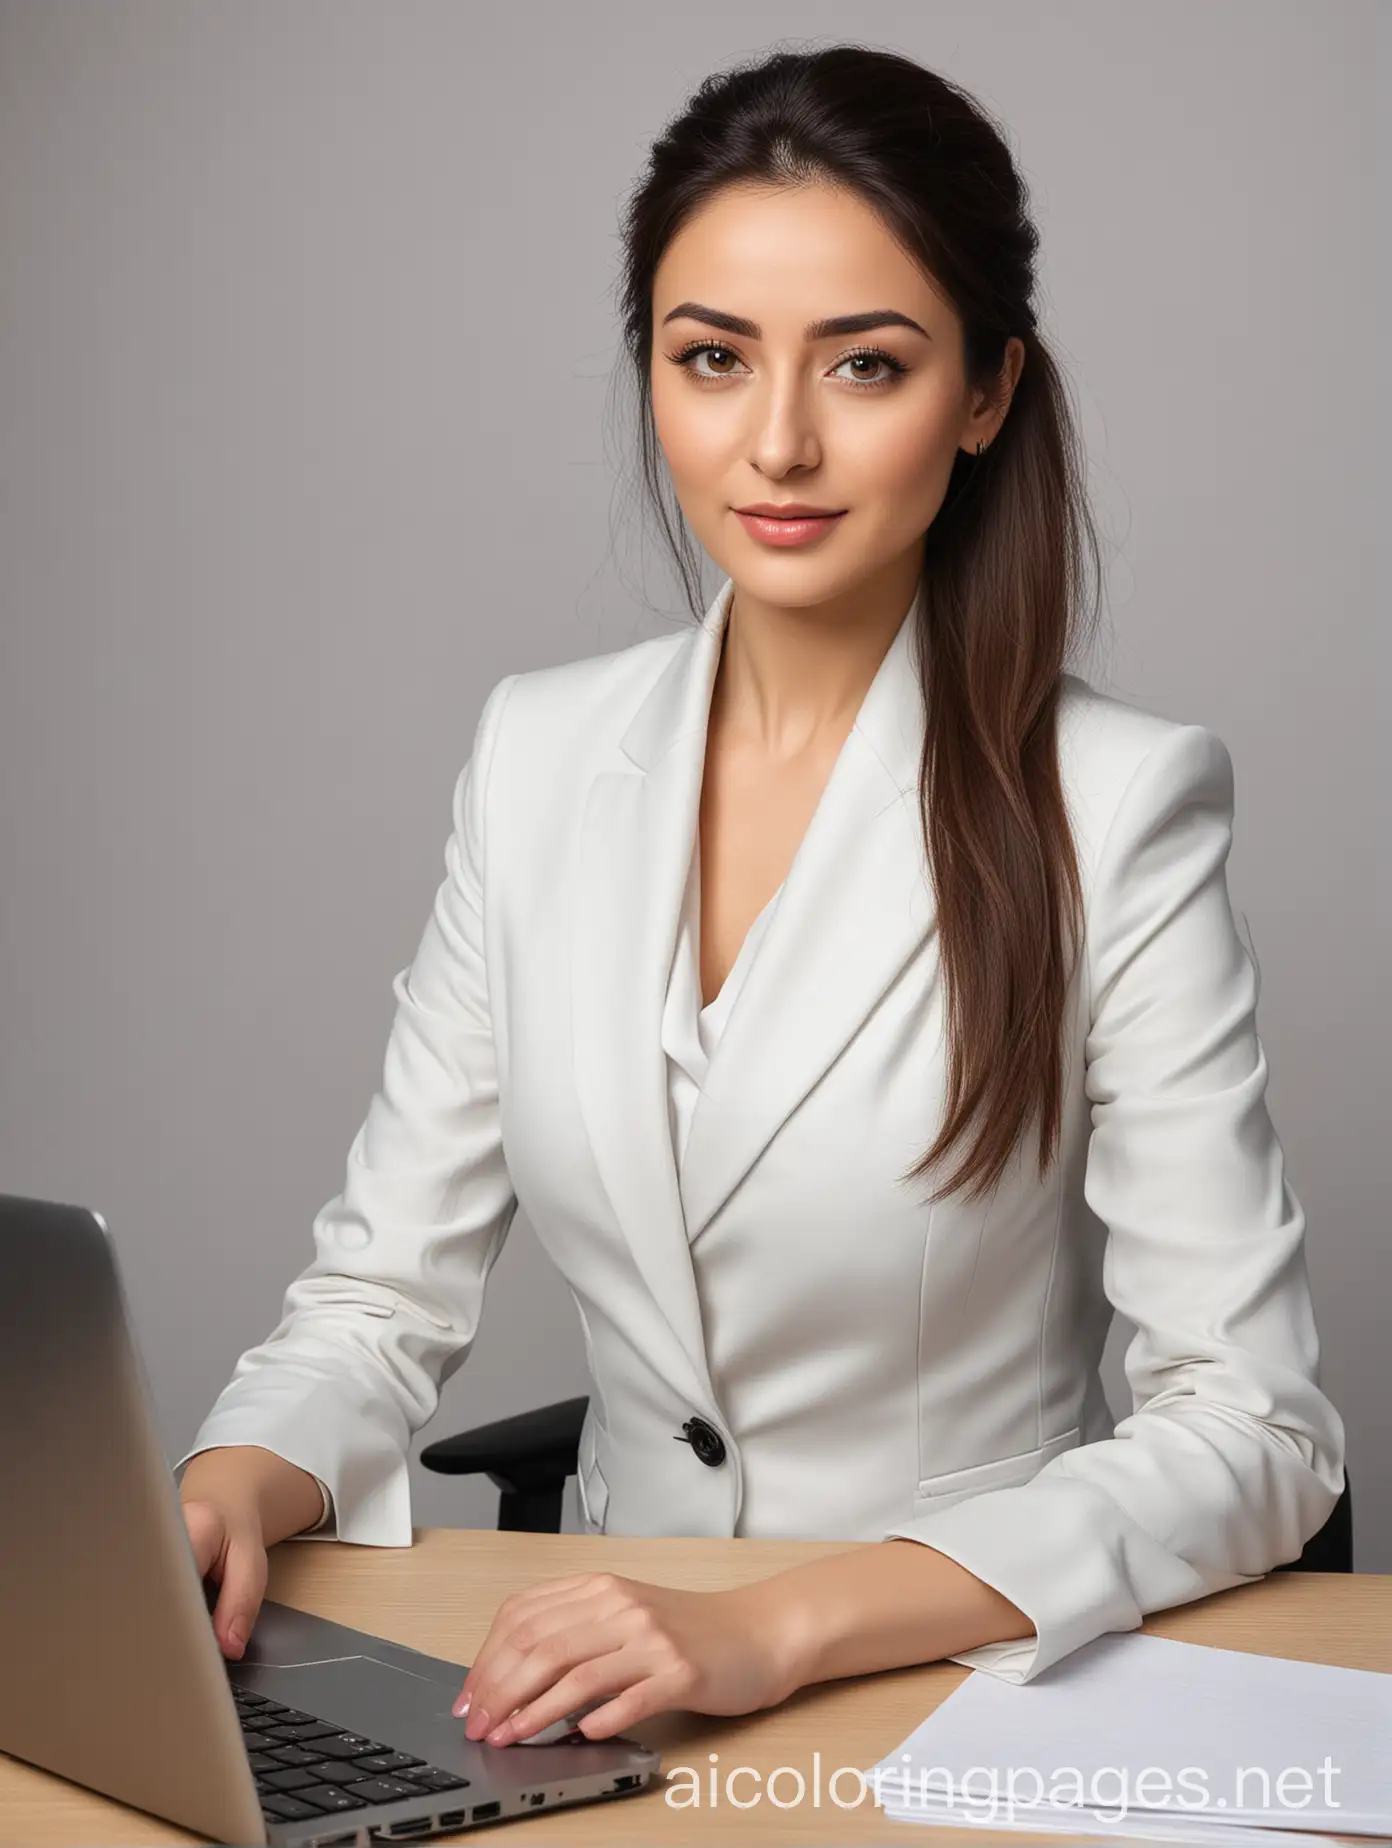 woman sitting at a desk with a laptop and a notebook, professional profile picture, amazing professional picture, kurdish lawyer, business woman, professional picture, detailed professional photo, dilraba dilmurat, portait photo profile picture, young business woman, professional portrait, female lawyer, in a business suit, well lit professional photo, girl in suit, girl in a suit, Coloring Page, black and white, line art, white background, Simplicity, Ample White Space. The background of the coloring page is plain white to make it easy for young children to color within the lines. The outlines of all the subjects are easy to distinguish, making it simple for kids to color without too much difficulty